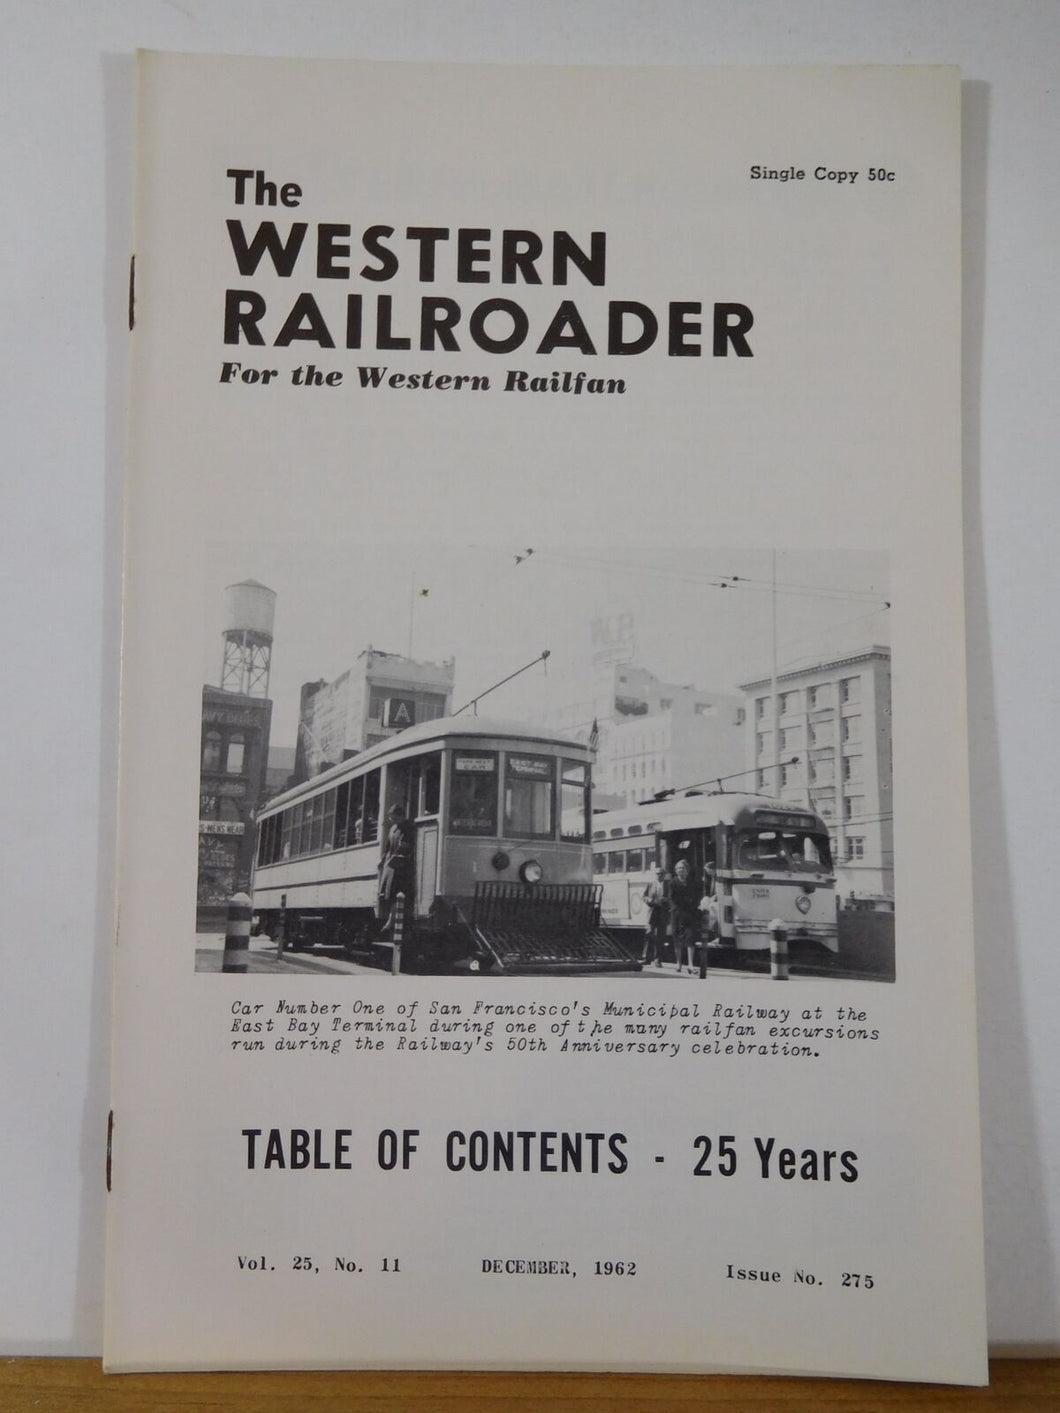 Western Railroader #275 1962 Table of Contents for 25 years, Sacramento Northern